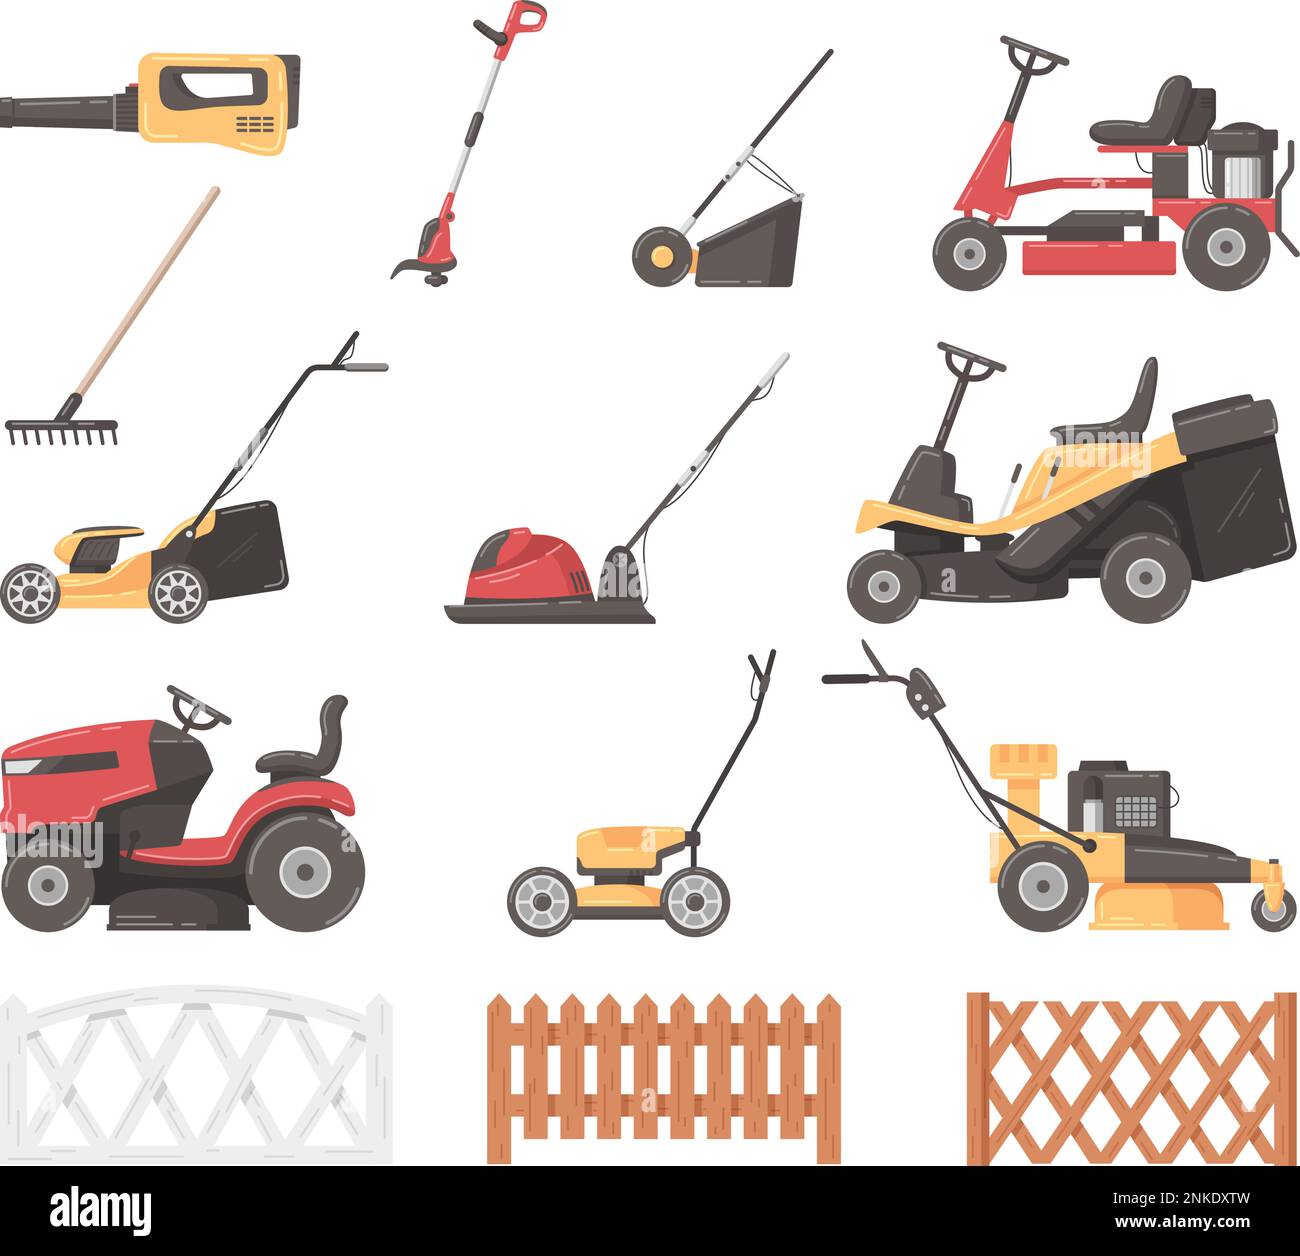 Lawn mower and grass cutters cartoon icons set isolated vector illustration Stock Vector